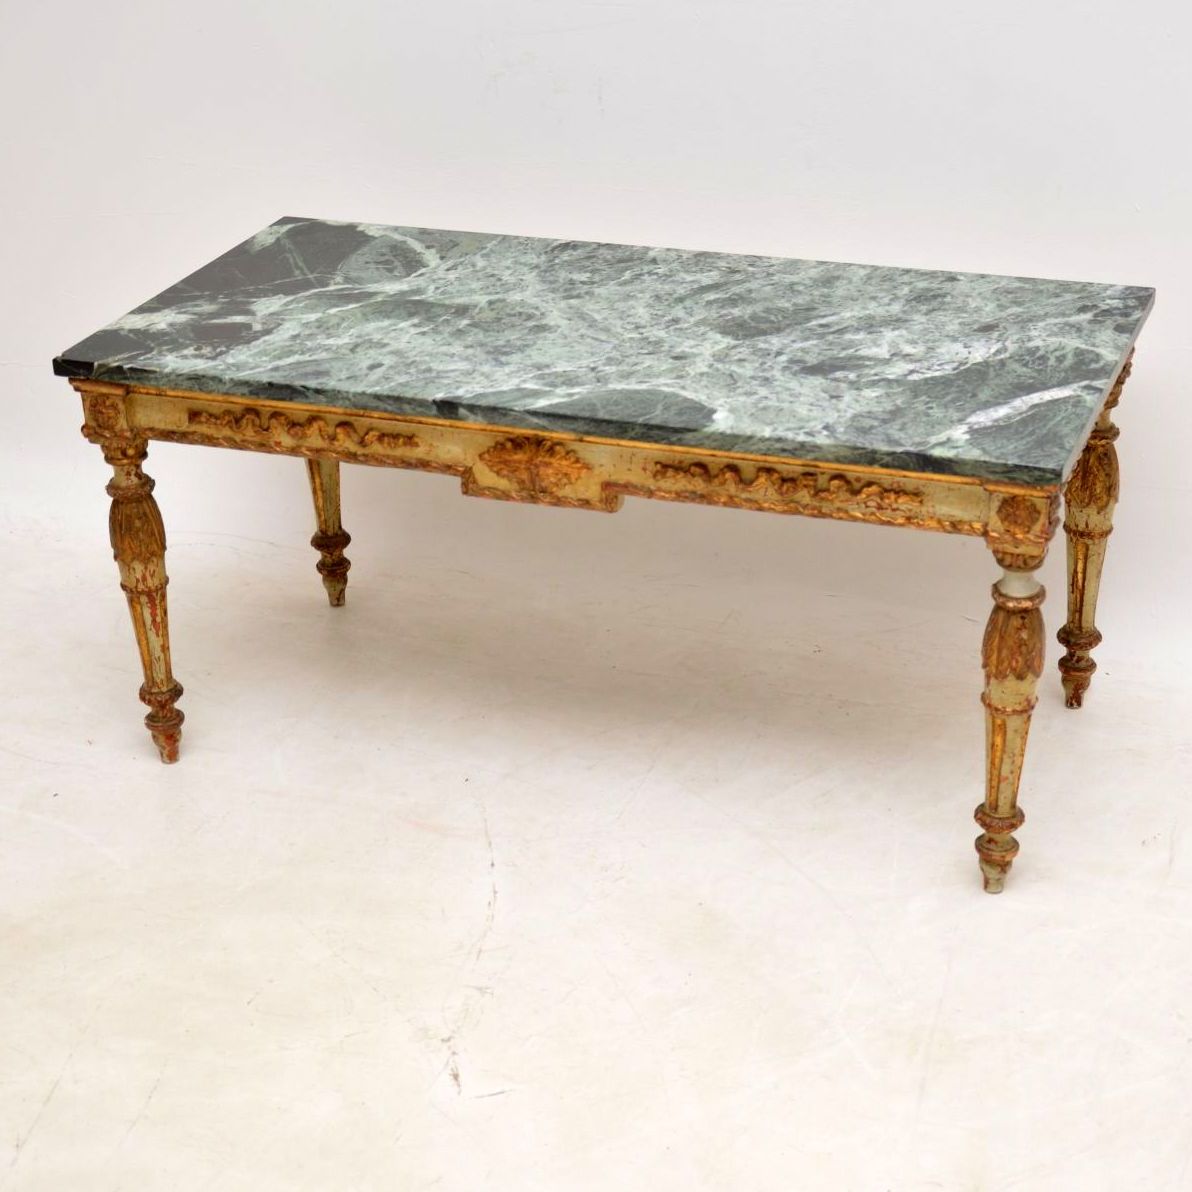 Antique French Marble Top Coffee Table – Marylebone Antiques Regarding 2020 Marble Top Coffee Tables (View 1 of 20)